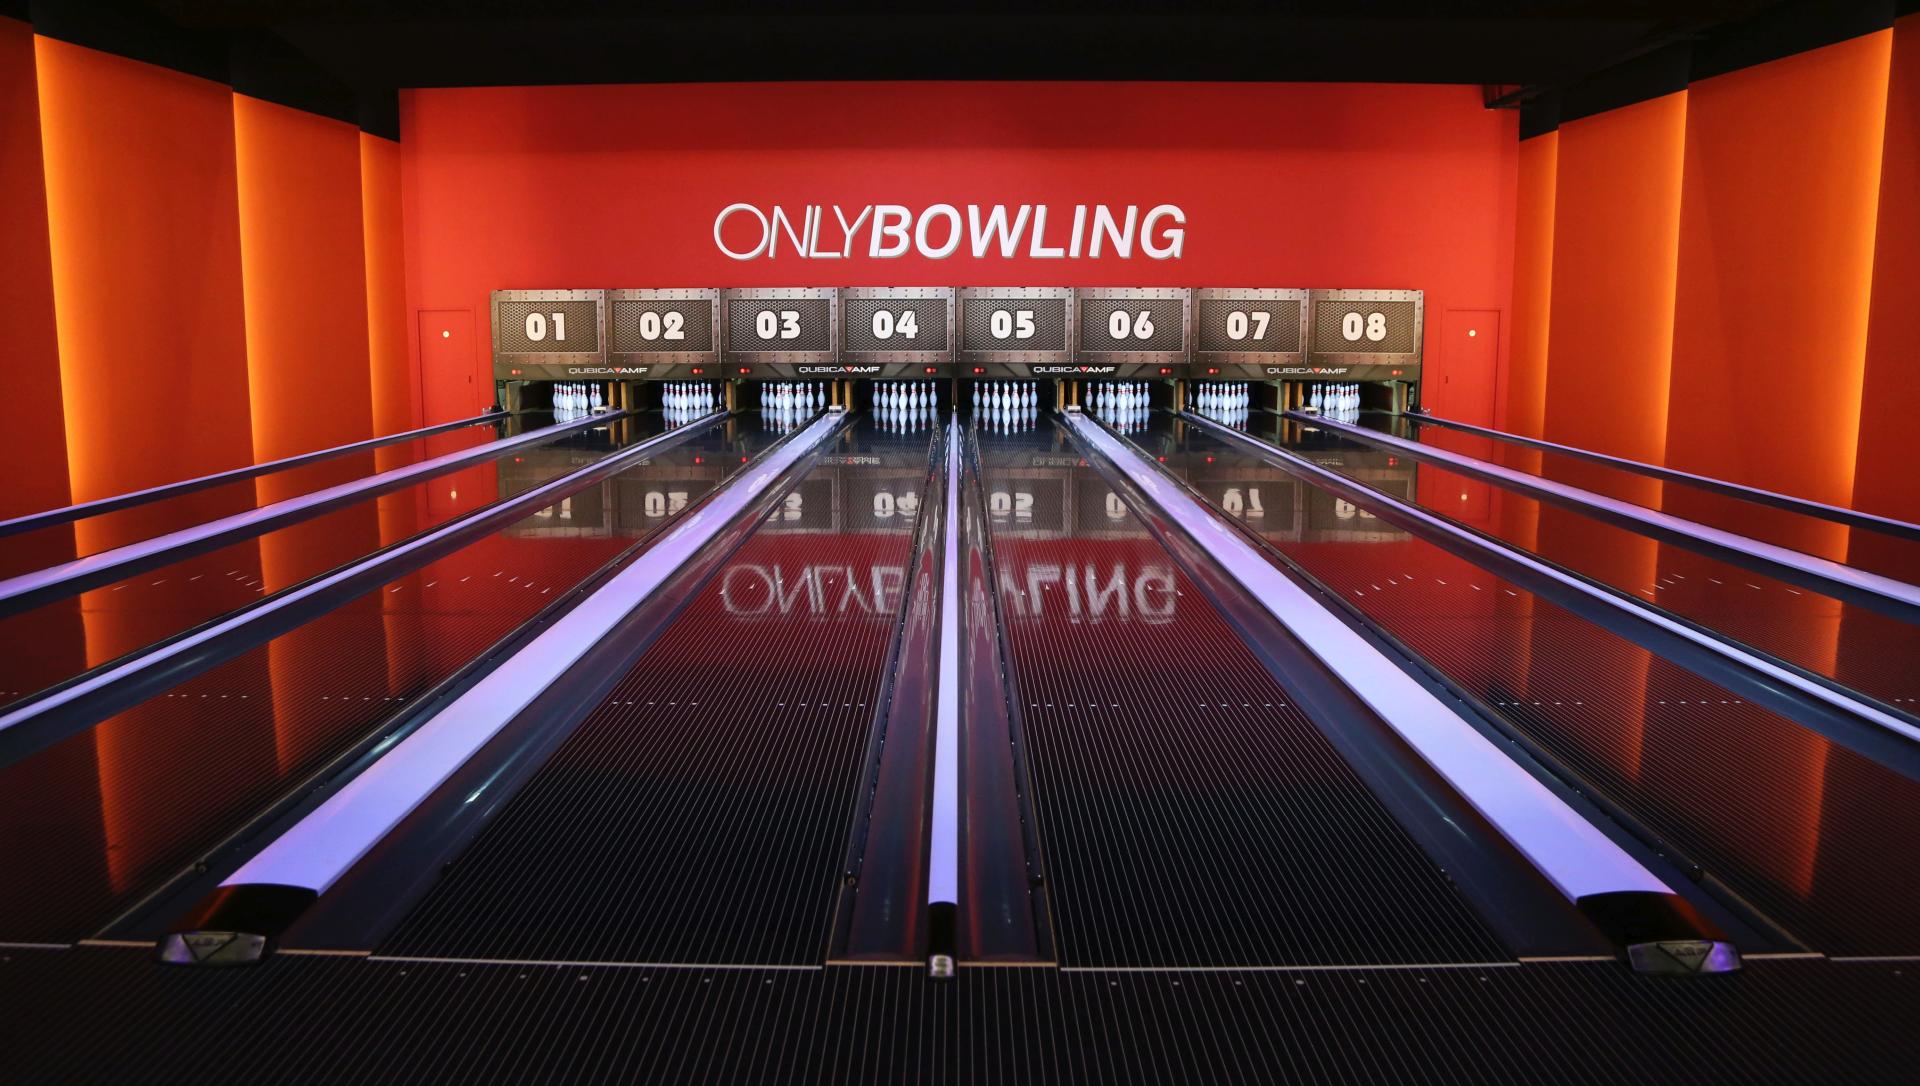 The new bowling alley is open again